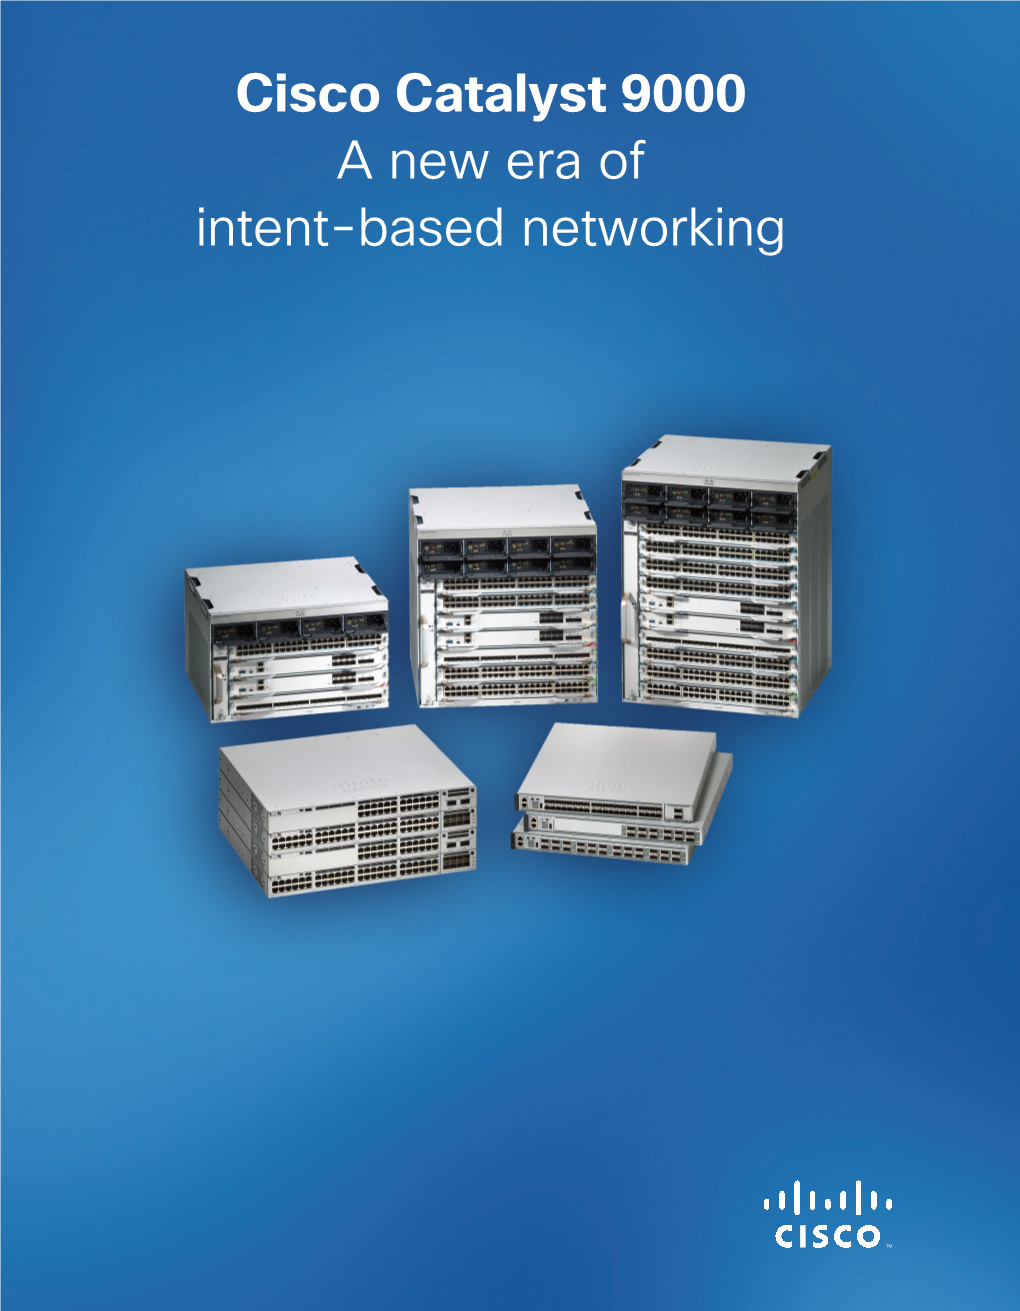 Cisco Catalyst 9000 a New Era of Intent-Based Networking